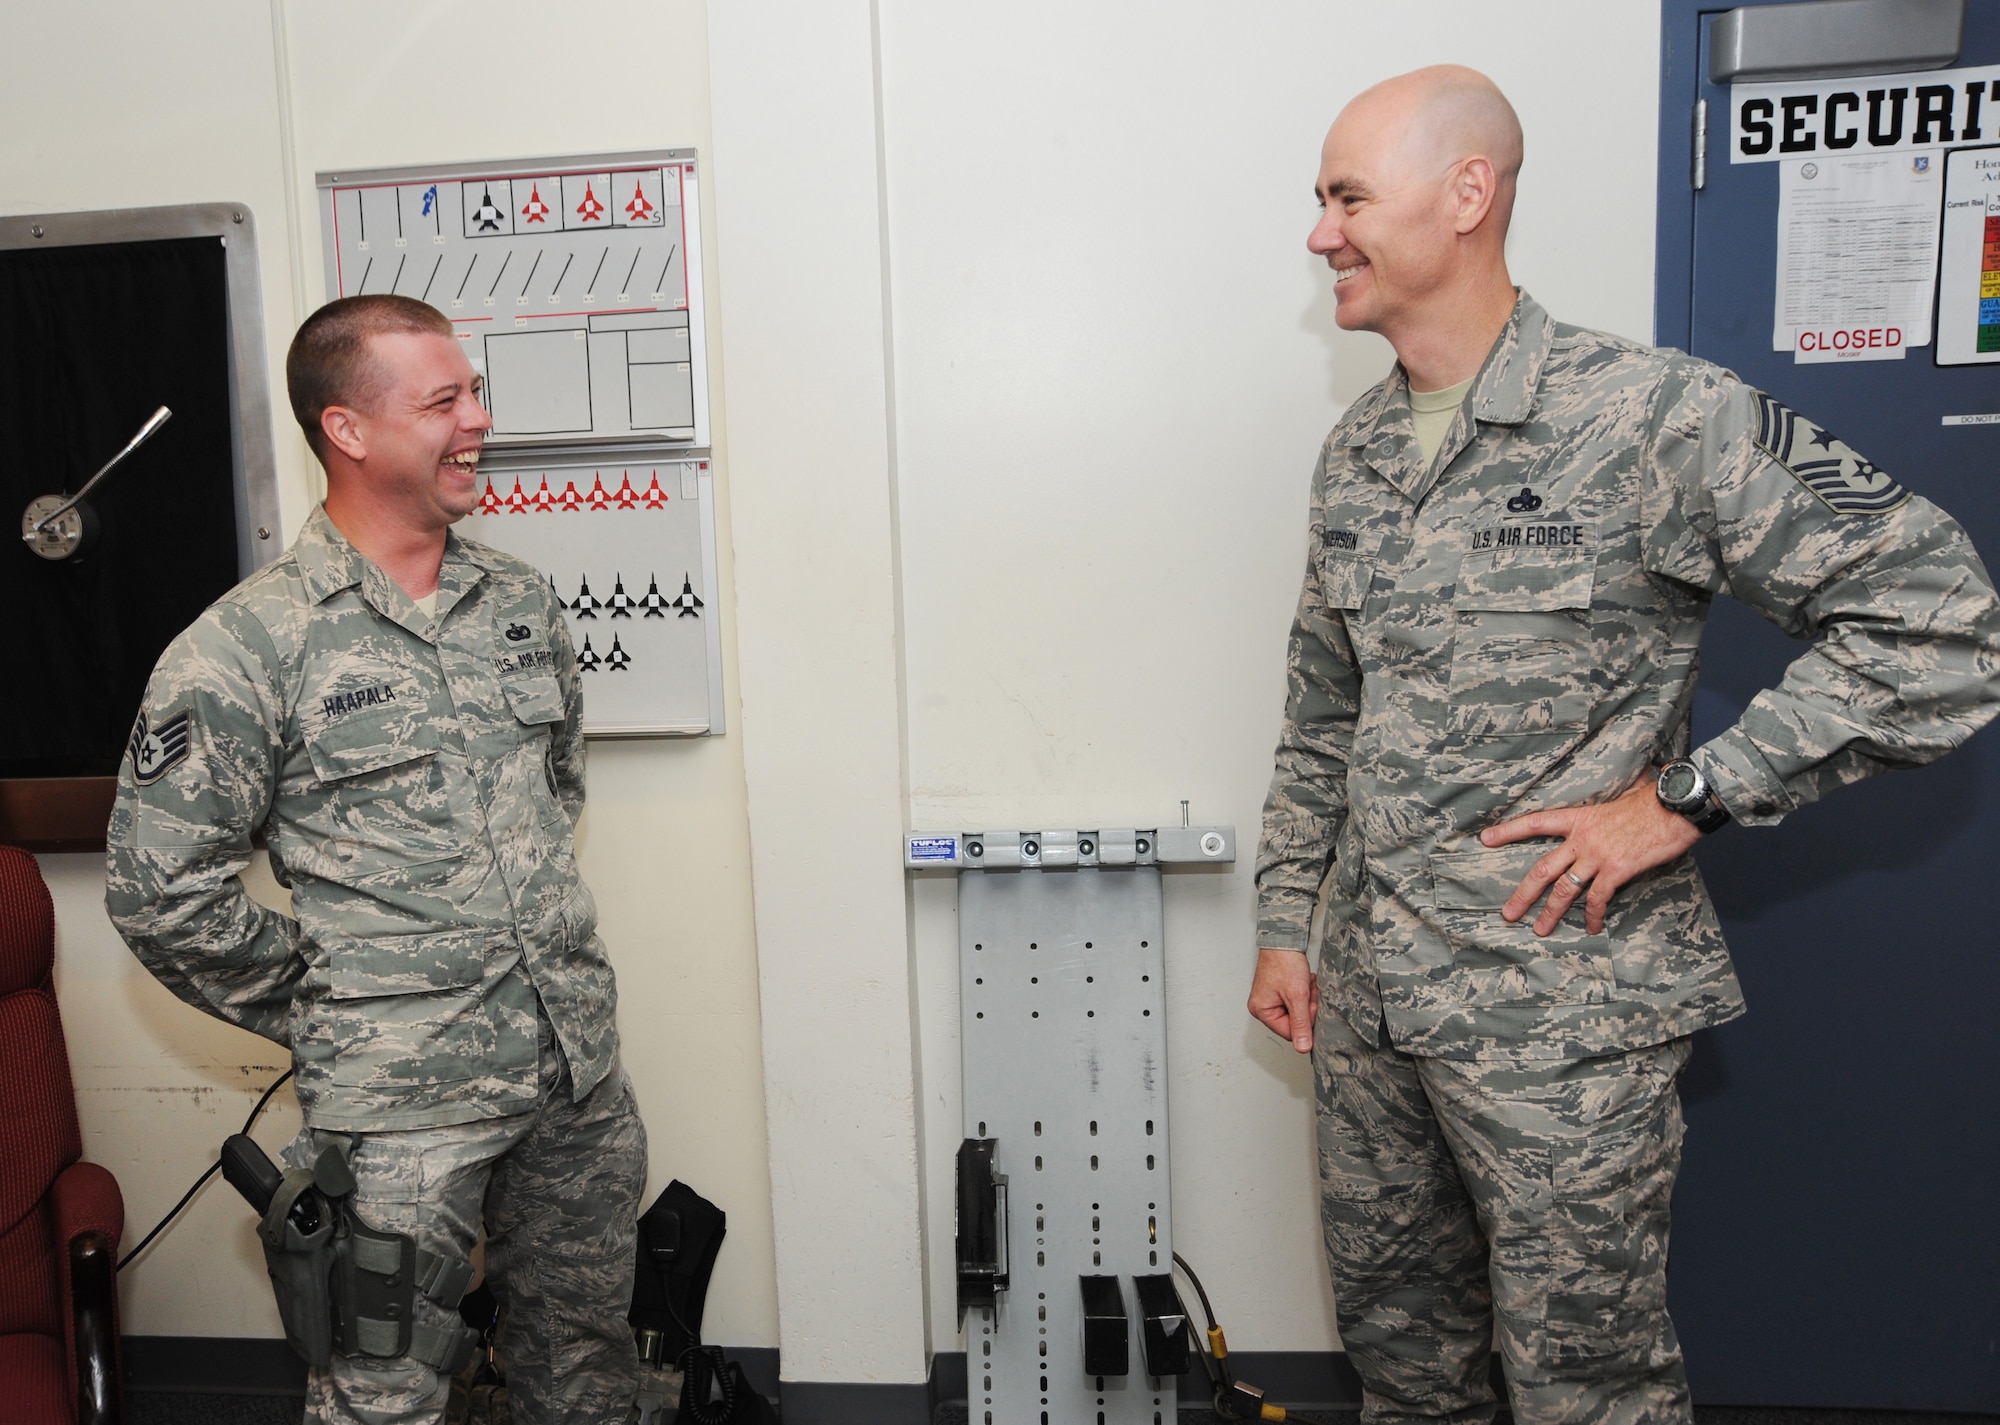 Staff Sgt. Jonathan Haapala, left, assigned to the 142nd Security Forces Squadron, shares a lighter moment with Ronald C. Anderson Jr., Command Chief Master Sgt., 1st Air Force, right, during his visit to the Portland Air National Guard Base, Ore., June 10, 2014. (Air National Guard photo by Tech. Sgt. John Hughel, 142nd Fighter Wing Public Affairs/Released)